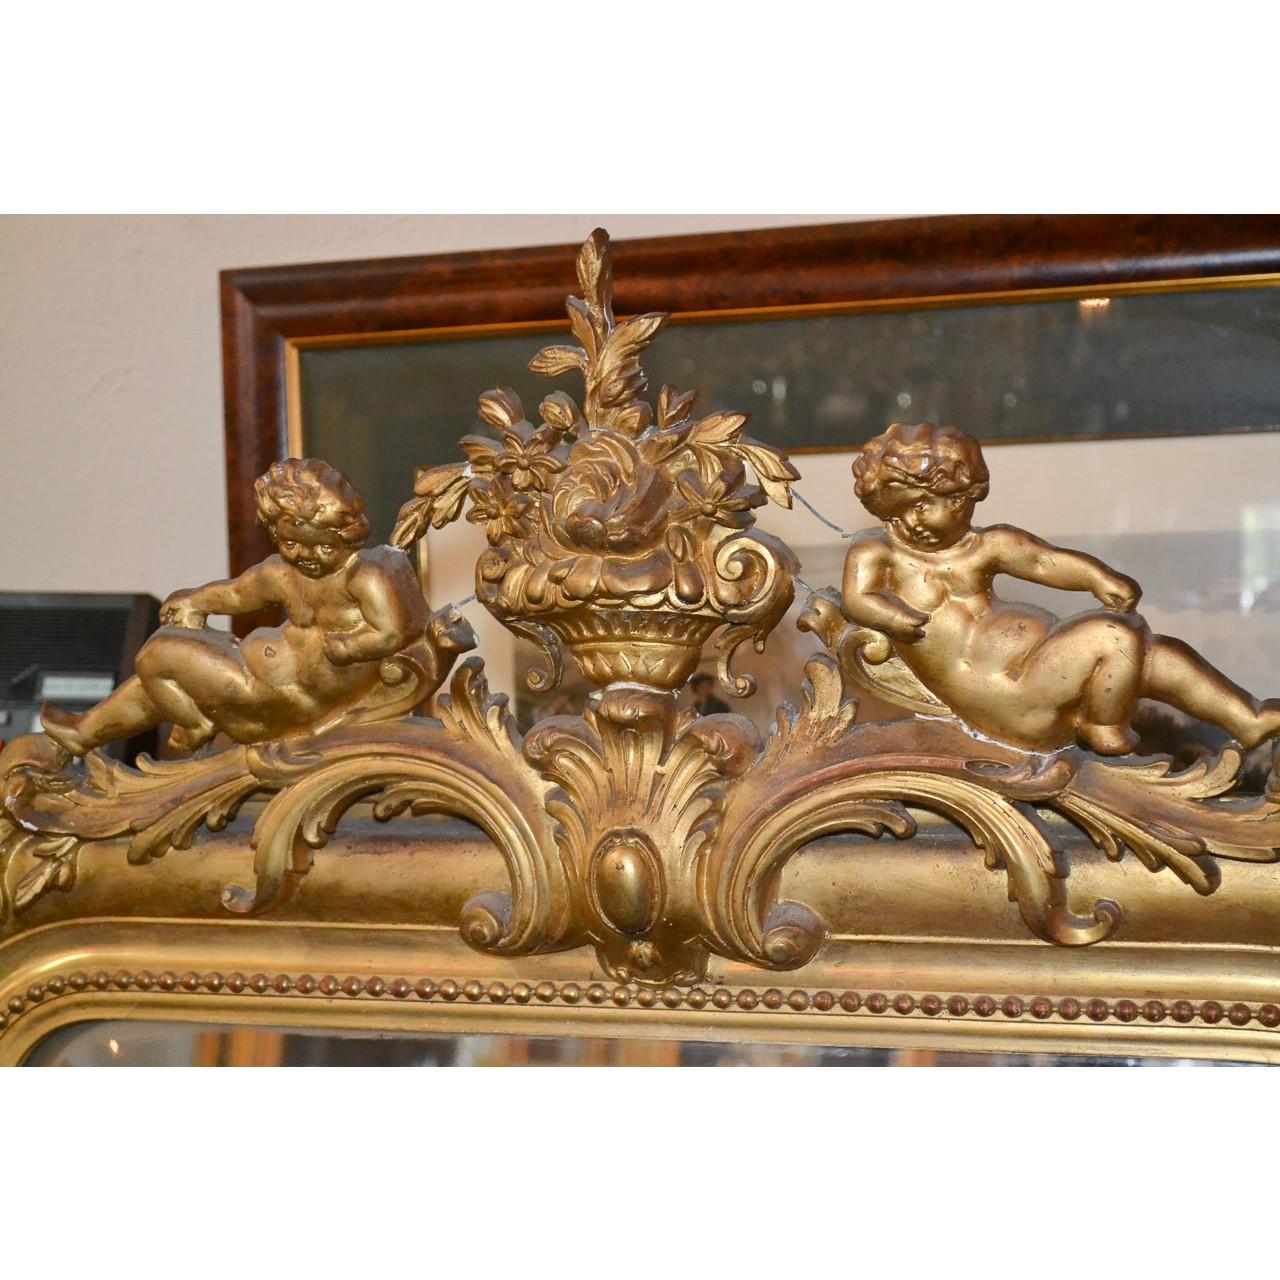 Exquisite 19th century French Louis Philippe carved wood and gesso beveled edge console or wall mirror with a gold-gilt finish. The finely detailed crest decorated with a floral urn flanked by cherubs resting upon scrolling leaves. The frame